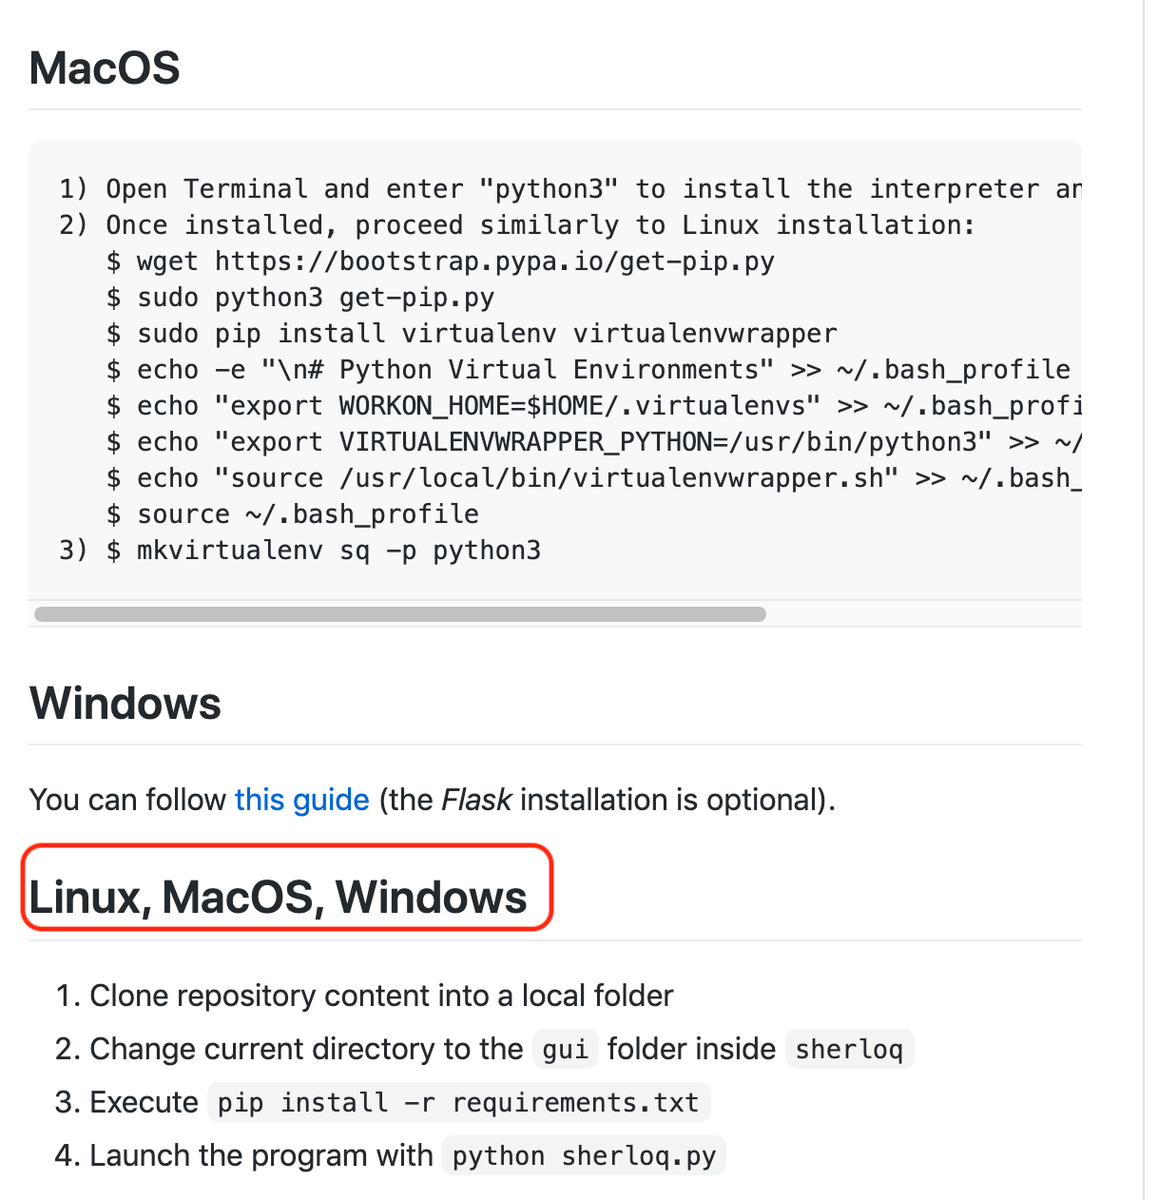 Under the "MacOS" instructions, which I followed, and the Windows instructions, there is another set of instructions (red box), which I guess I also need to still do?It would have been nice if the MacOS instructions ended with "Now proceed to the section "Linus, MacOS, Windows".